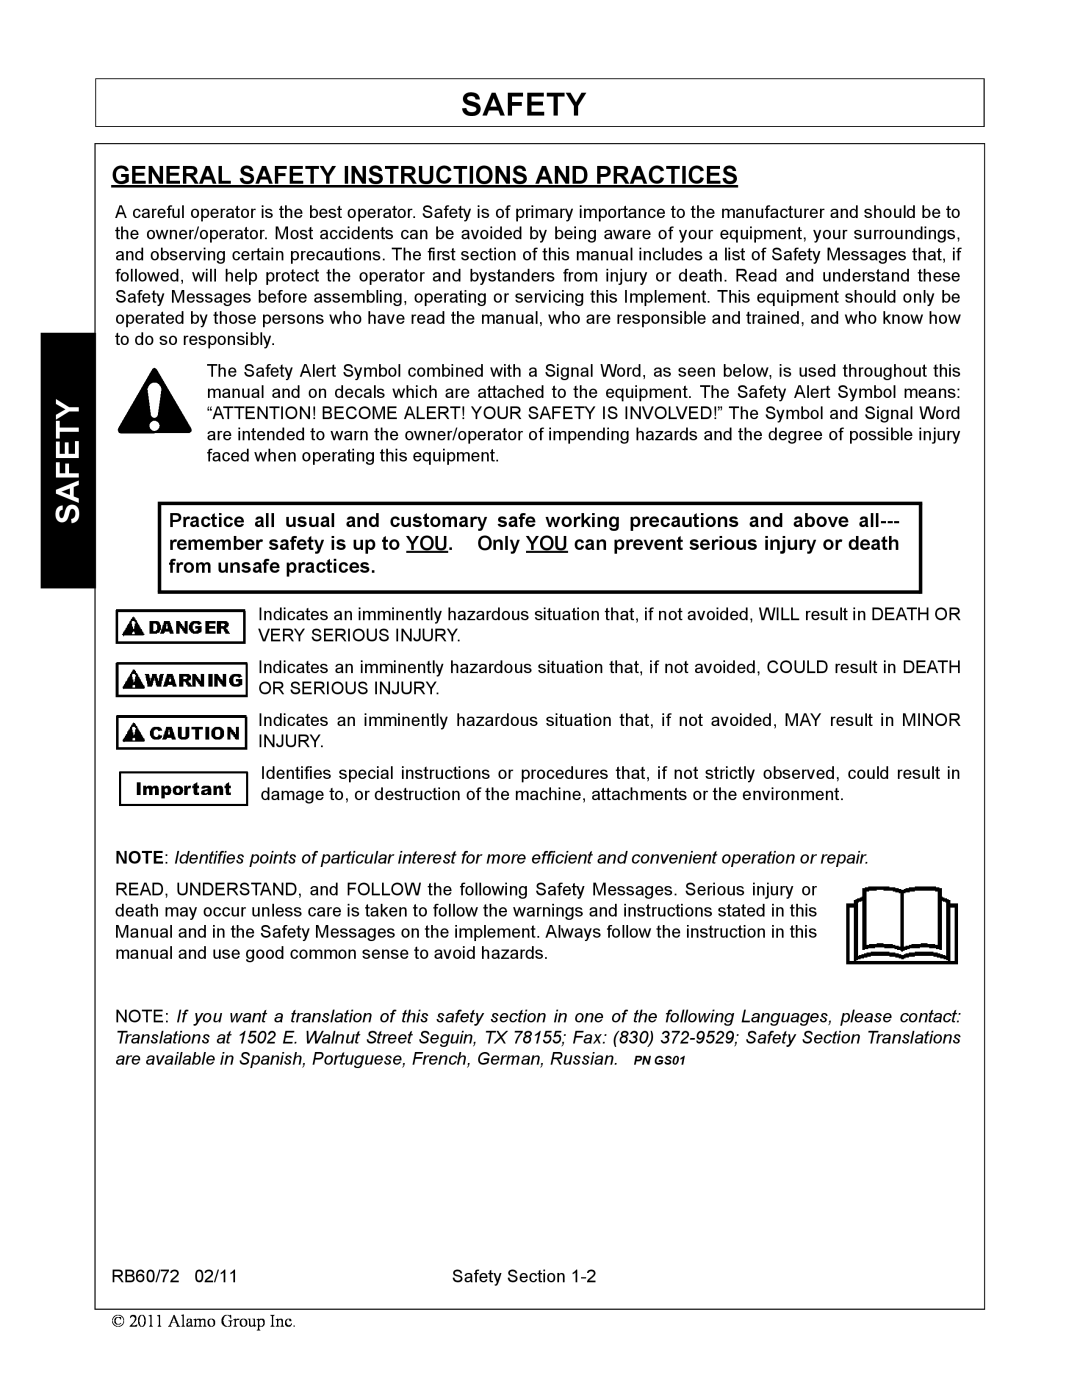 Blue Rhino RB60/72 manual General Safety Instructions And Practices 